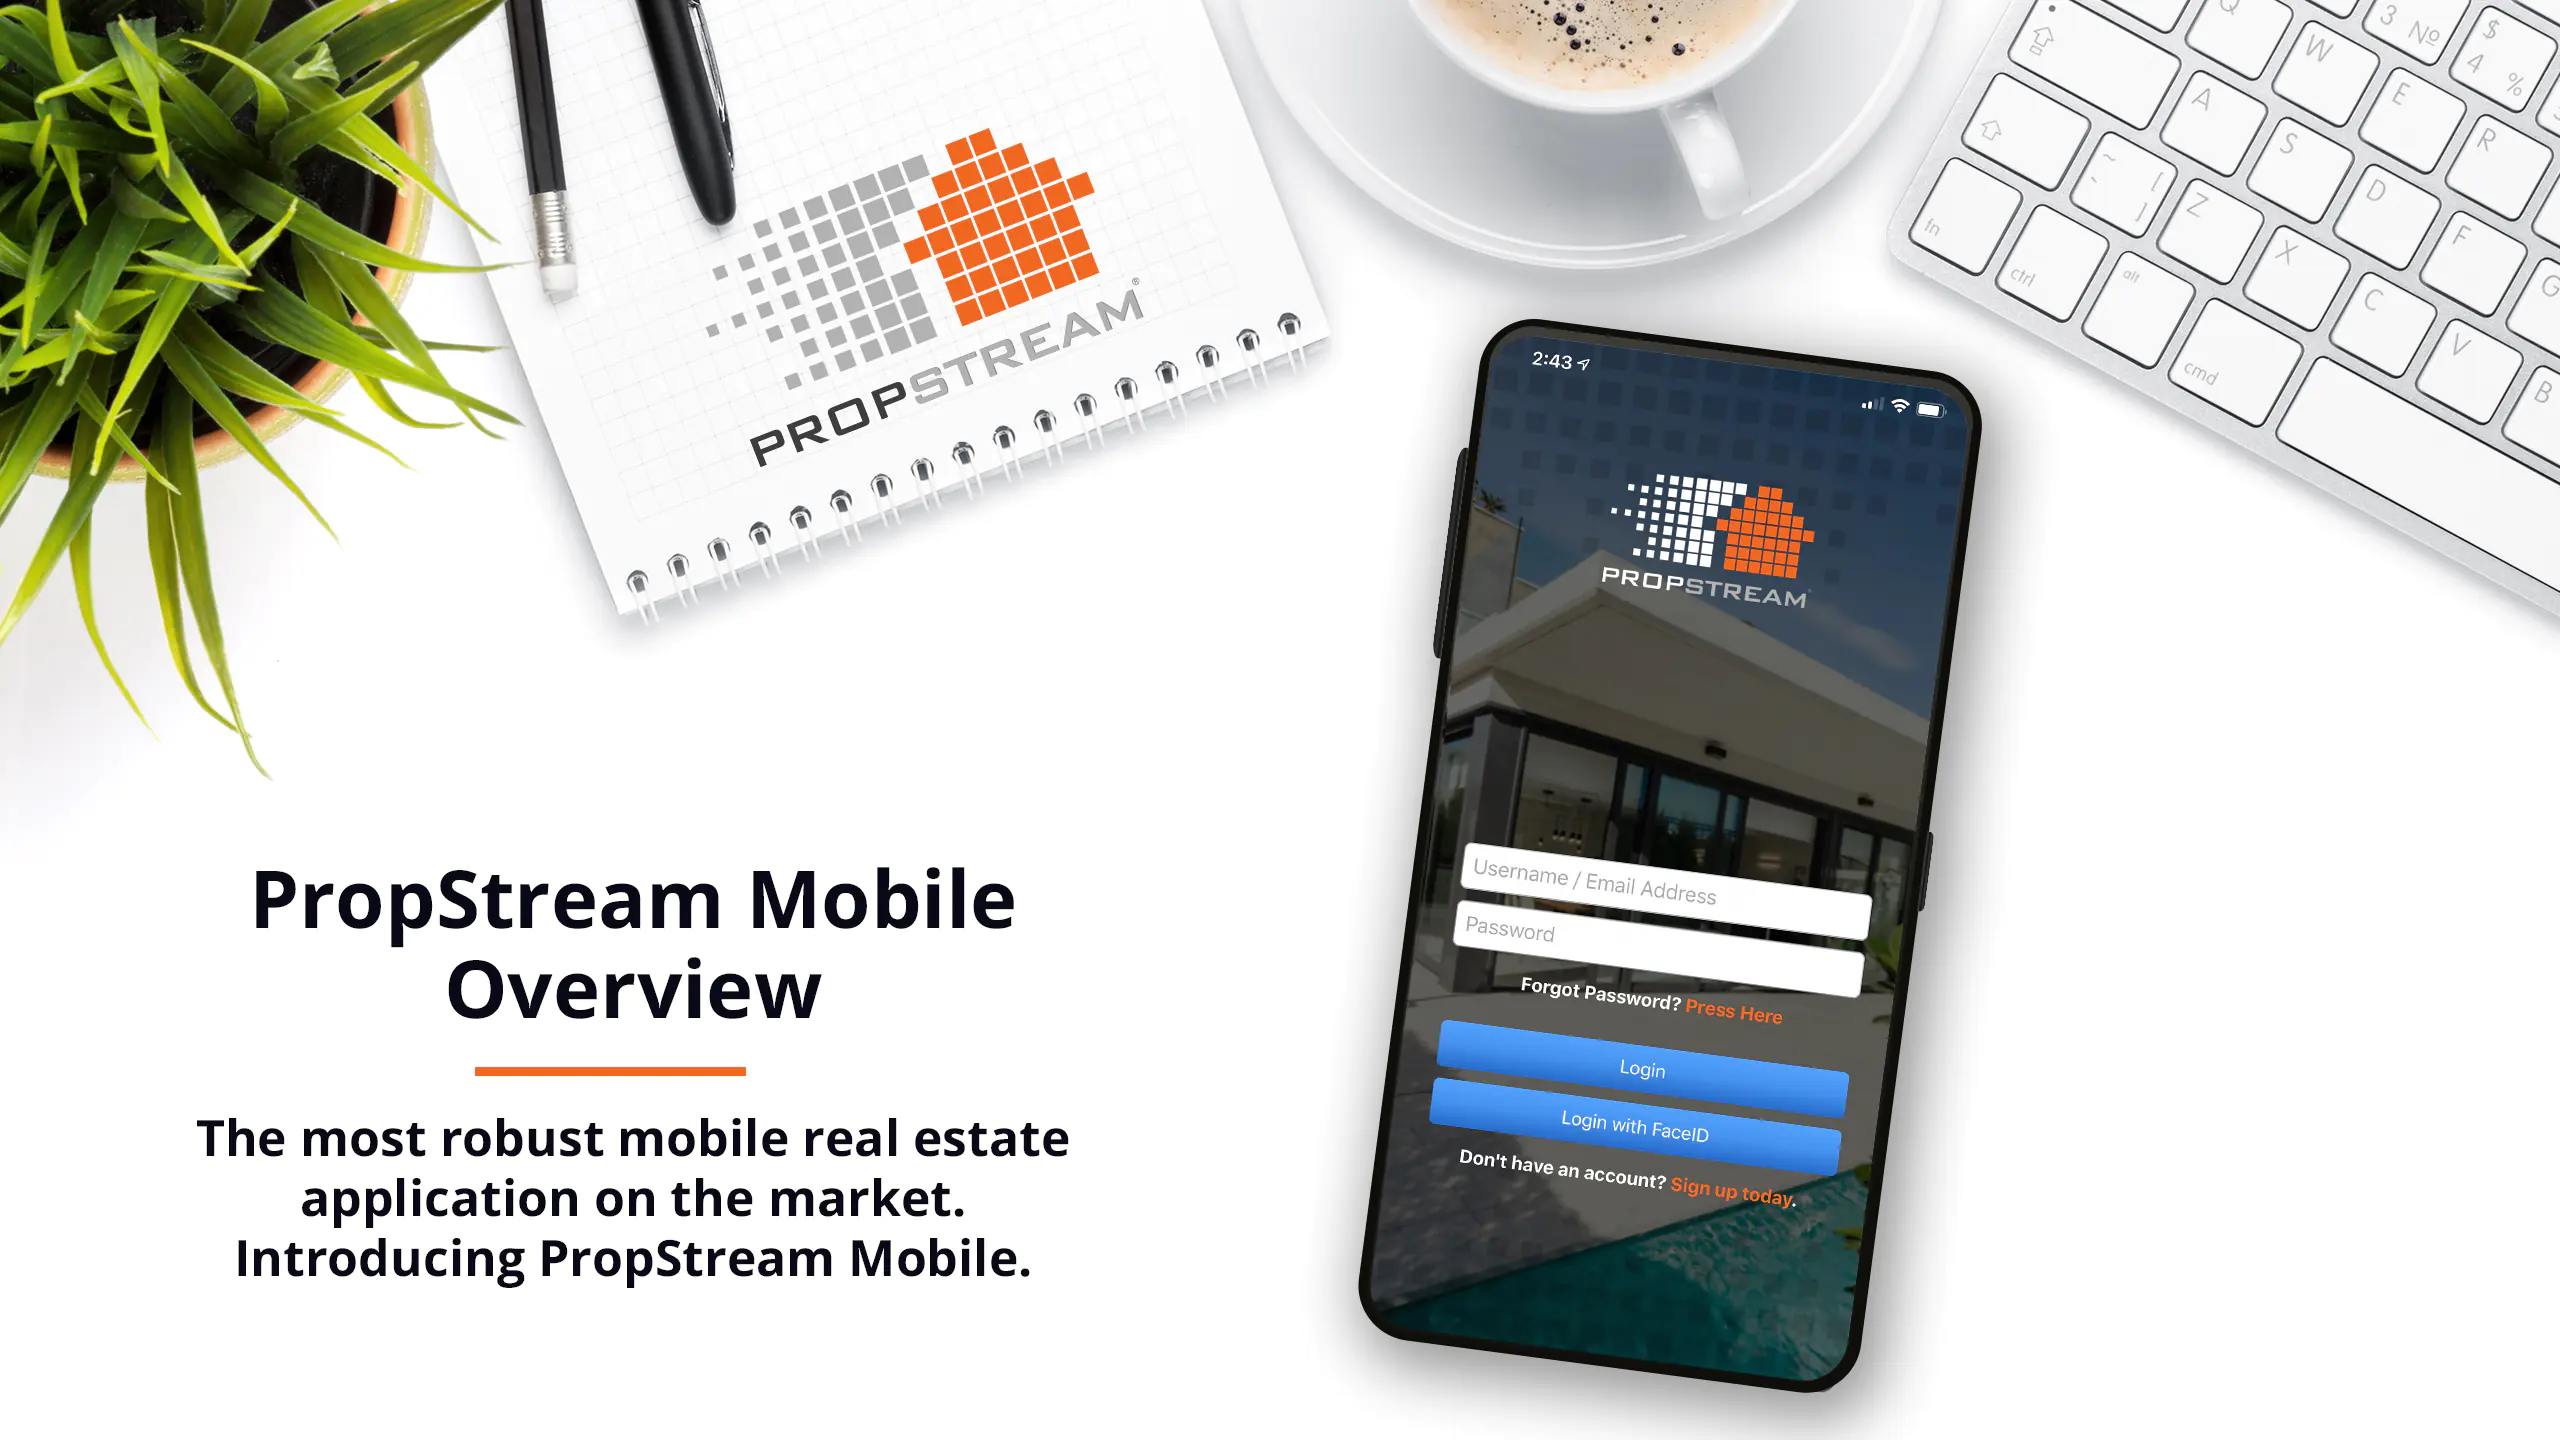 PropStream Mobile Overview